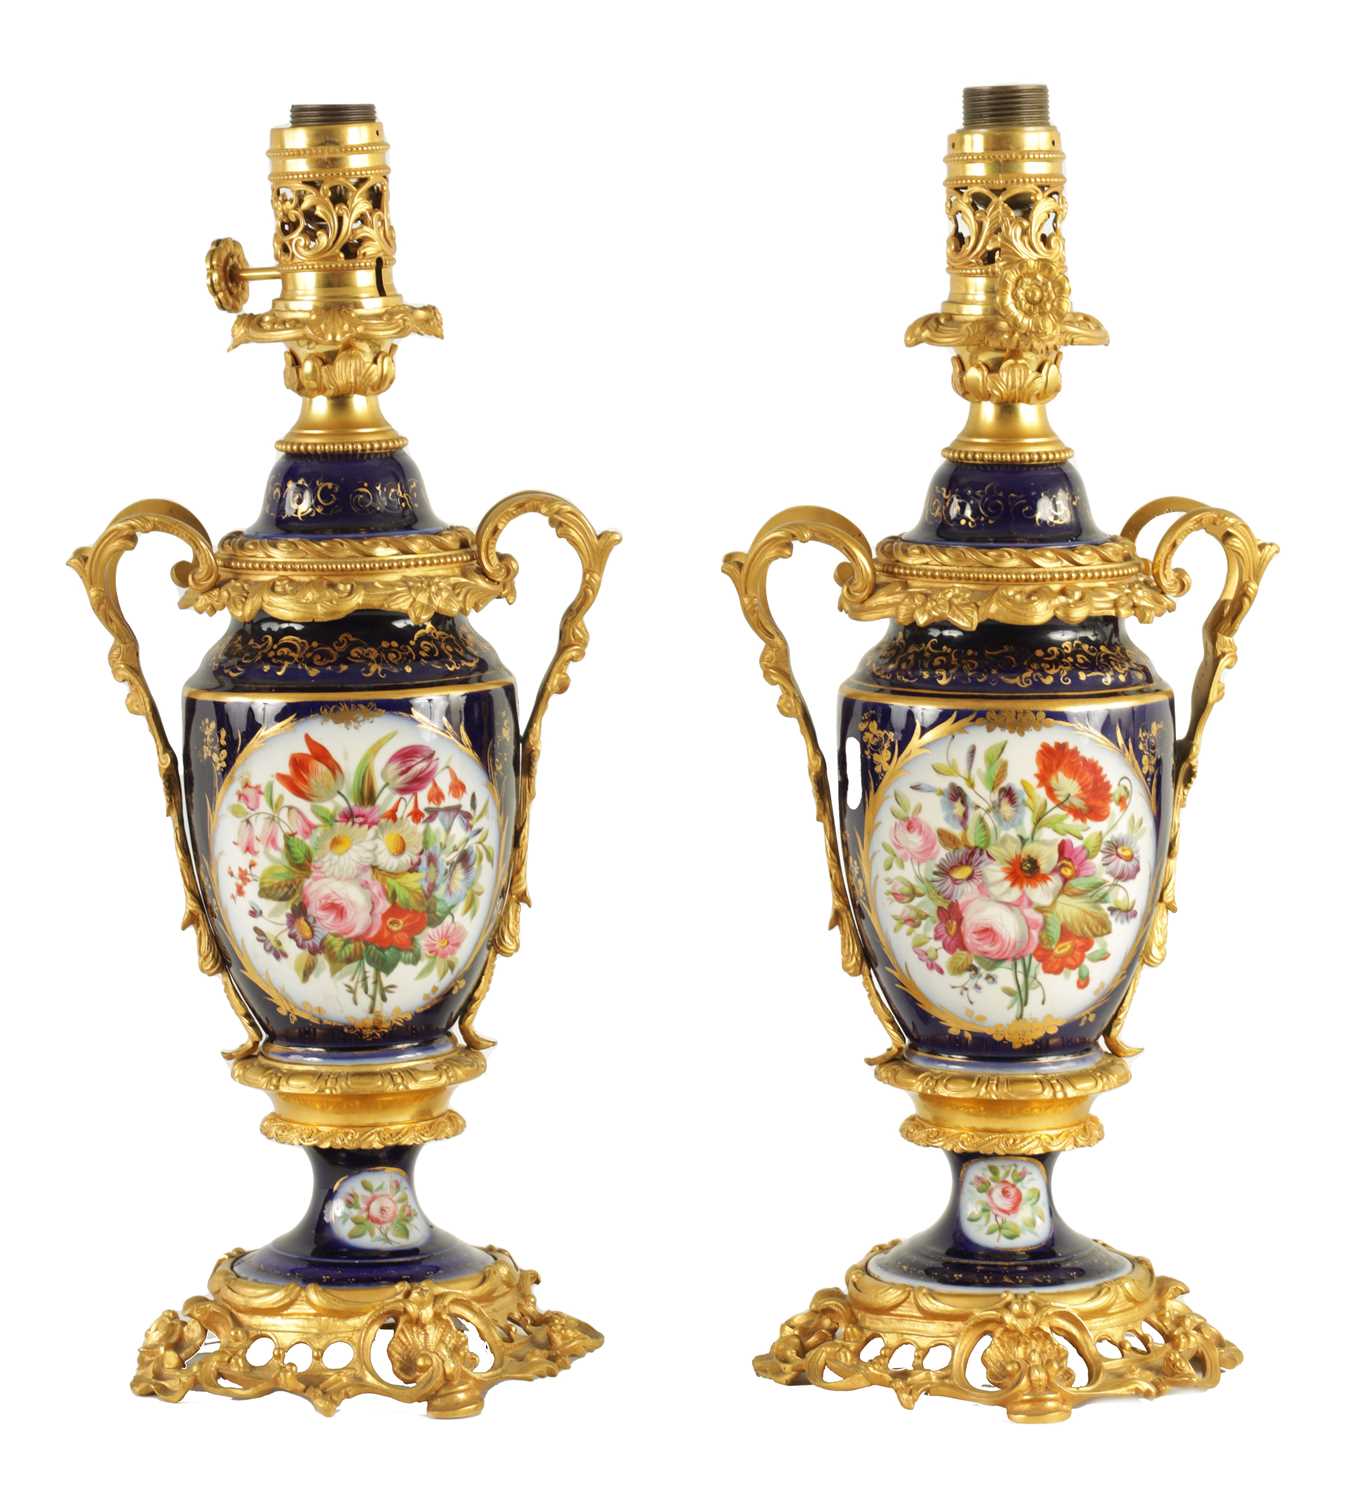 A PAIR OF 19TH CENTURY CONTINENTAL ORMOLU MOUNTED PORCELAIN LAMP BASES